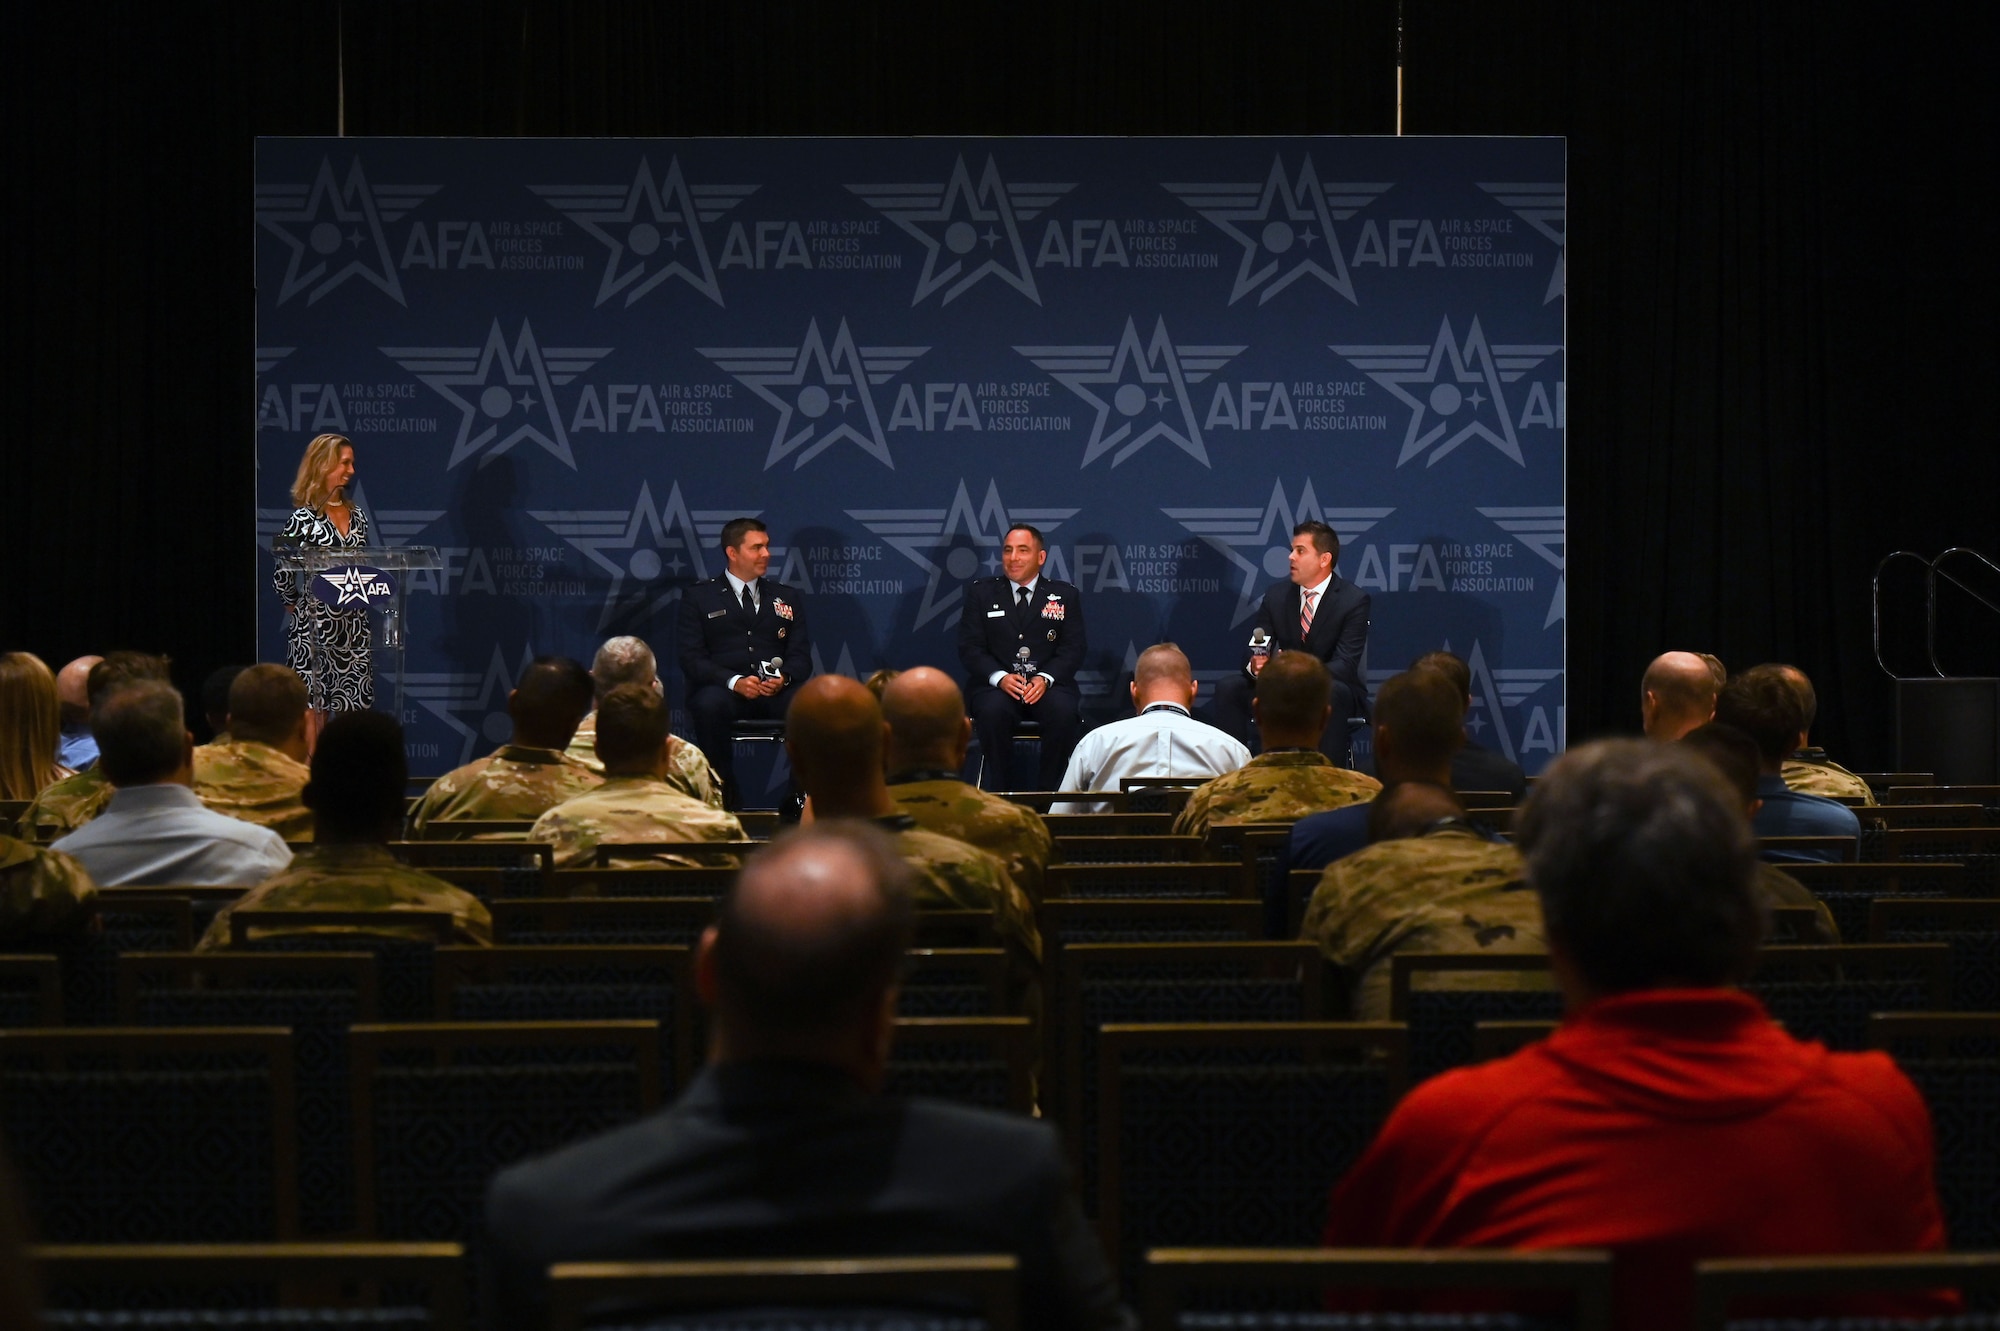 U.S. Air Force Brig. Gen. Richard Goodman, 57th Wing commander, left, U.S. Air Force Col. Josh Koslov, 350th Spectrum Warfare Wing commander, center, and Joshua Niedzwiecki, vice president and general manager of electronic combat solutions, BAE Systems, right, serve as panelists for the Spectrum Renaissance session during the Air & Space Forces Association’s (AFA) Air, Space & Cyber Conference at the Gaylord National Resort & Convention Center in National Harbor, Md., Sept. 13, 2023. During the panel, members discussed how the Spectrum has never been a more congested, contested and constrained domain to operate within. They discussed the dependability between air assets and the EMS as inseparable and the survivability of Airmen depends on the Air Force achieving and maintaining EMS superiority. (U.S. Air Force photo by Staff Sgt. Ericka A. Woolever)